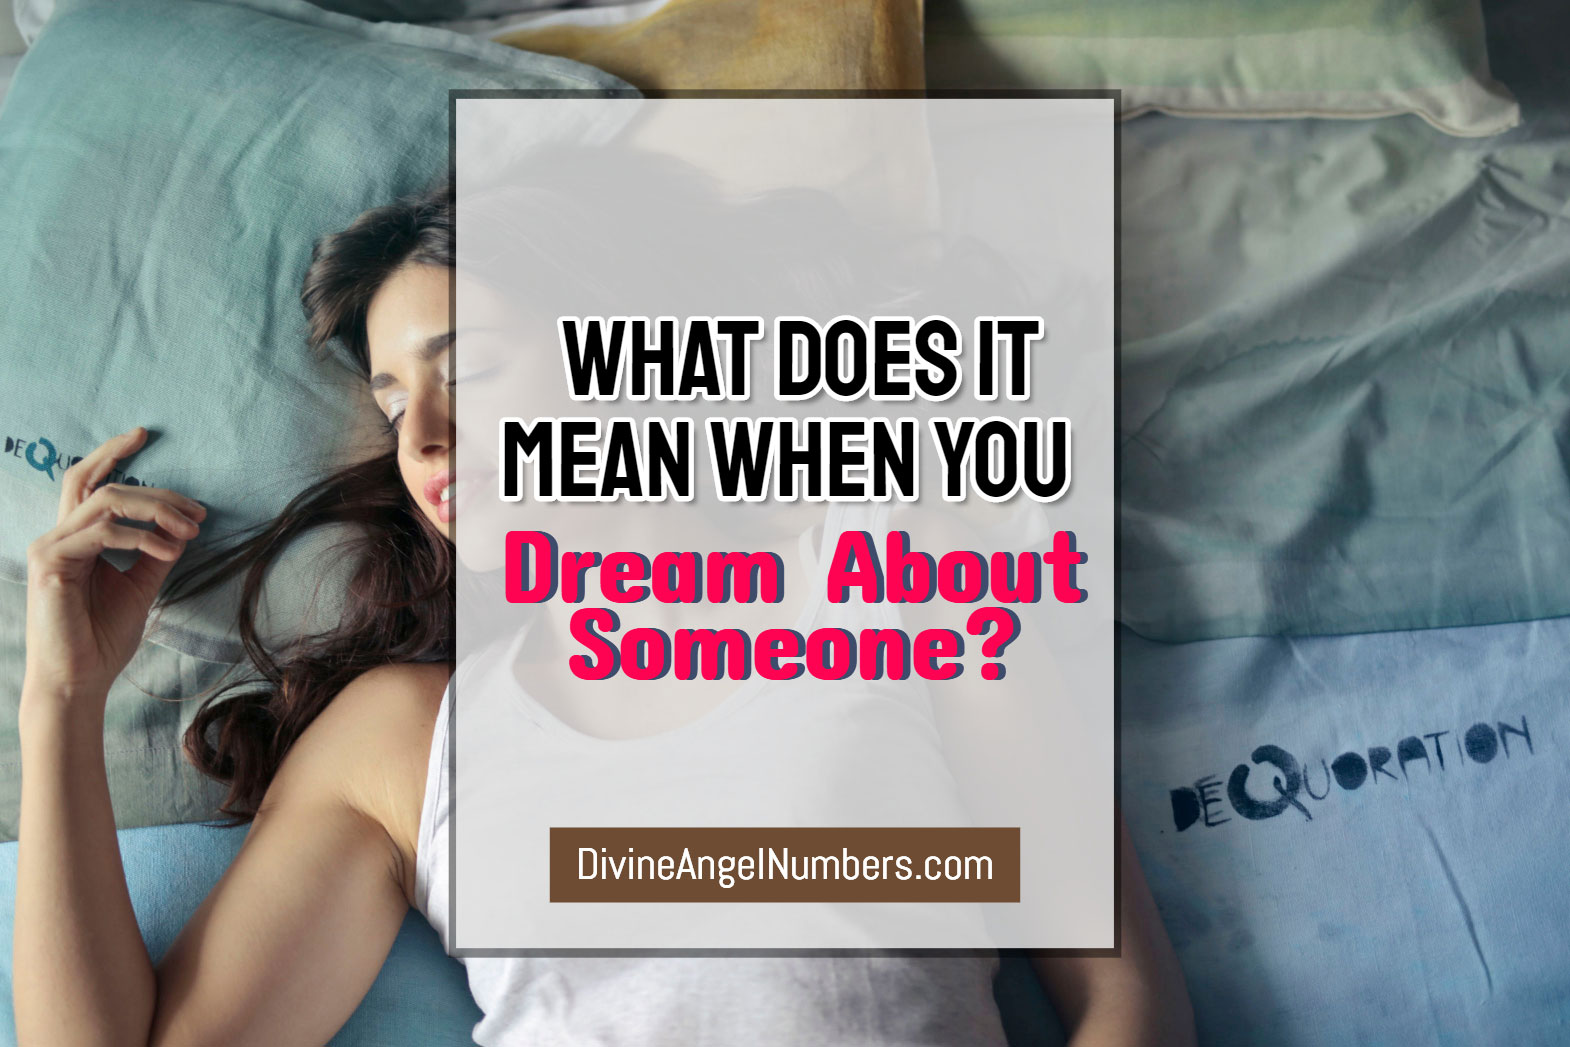 What Does It Mean When You Dream About Someone?